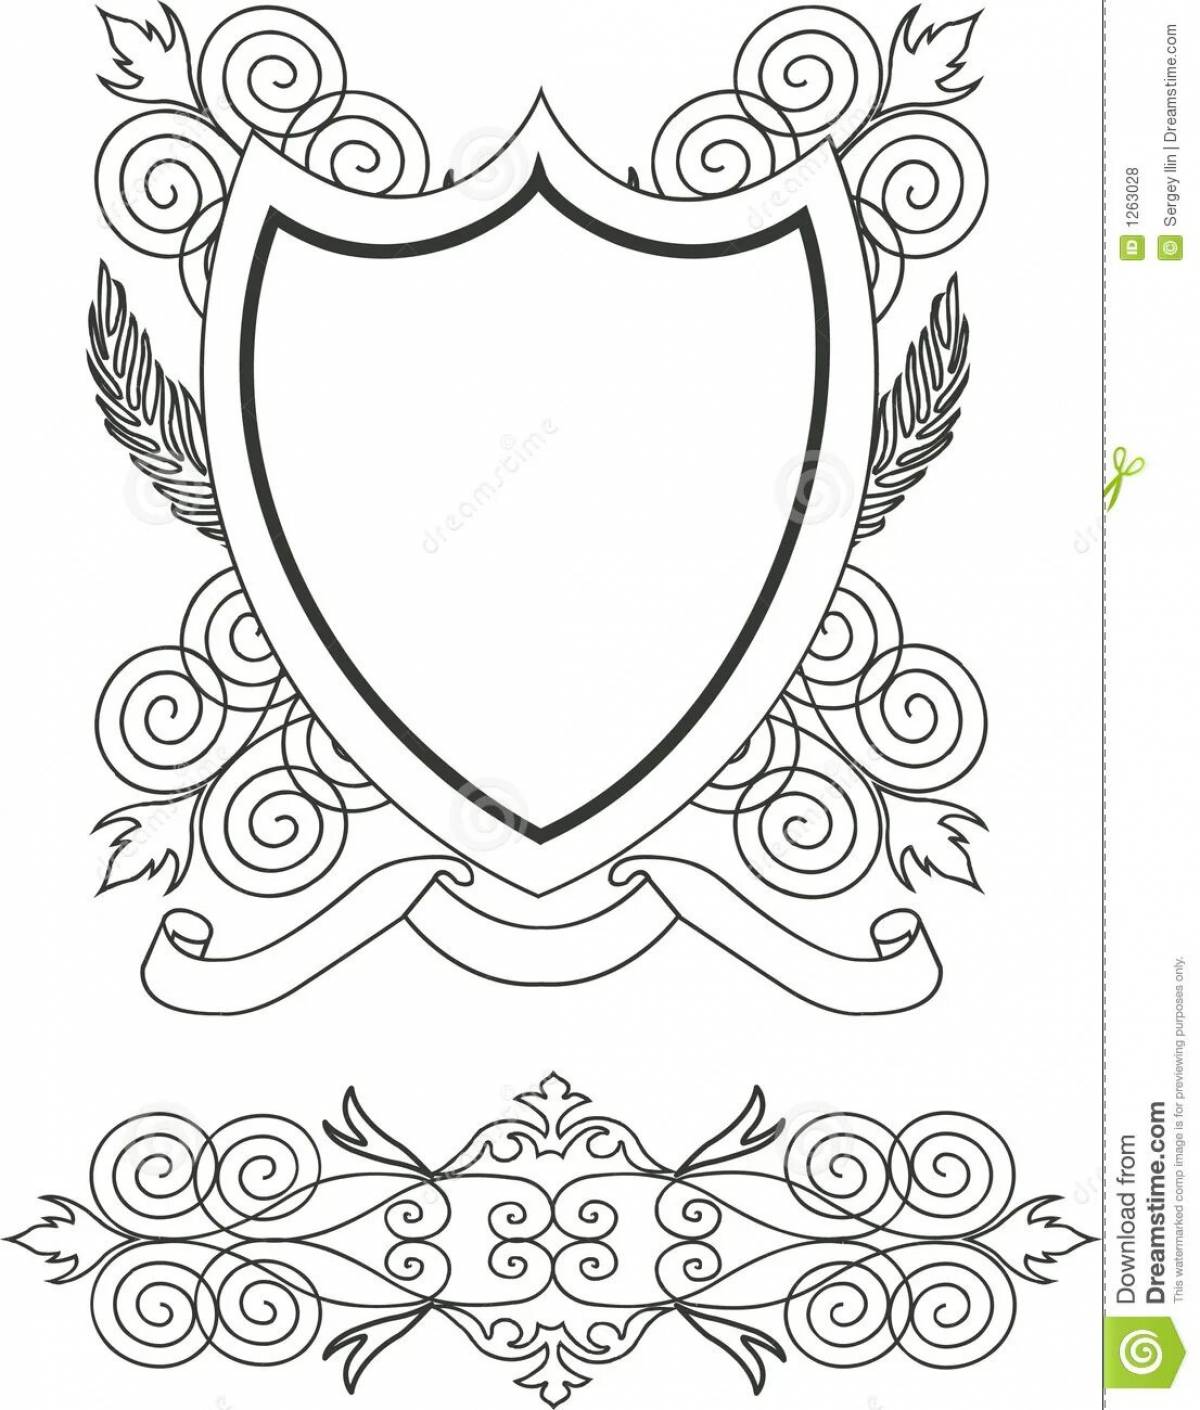 My family coat of arms #8